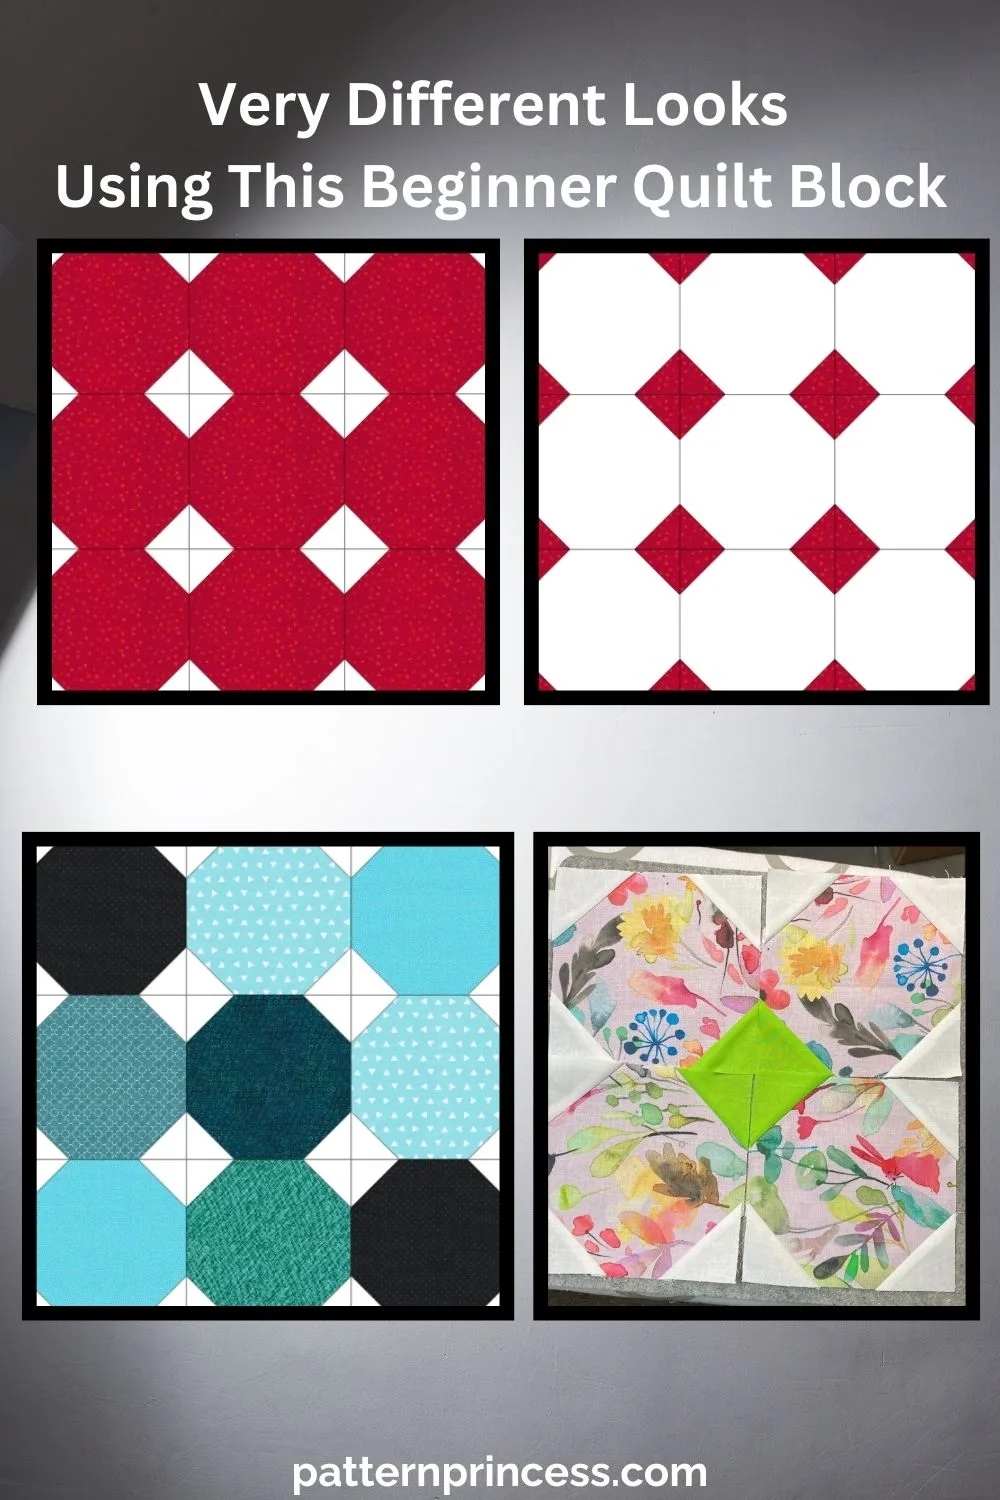 Very Different Looks Using This Beginner Quilt Block